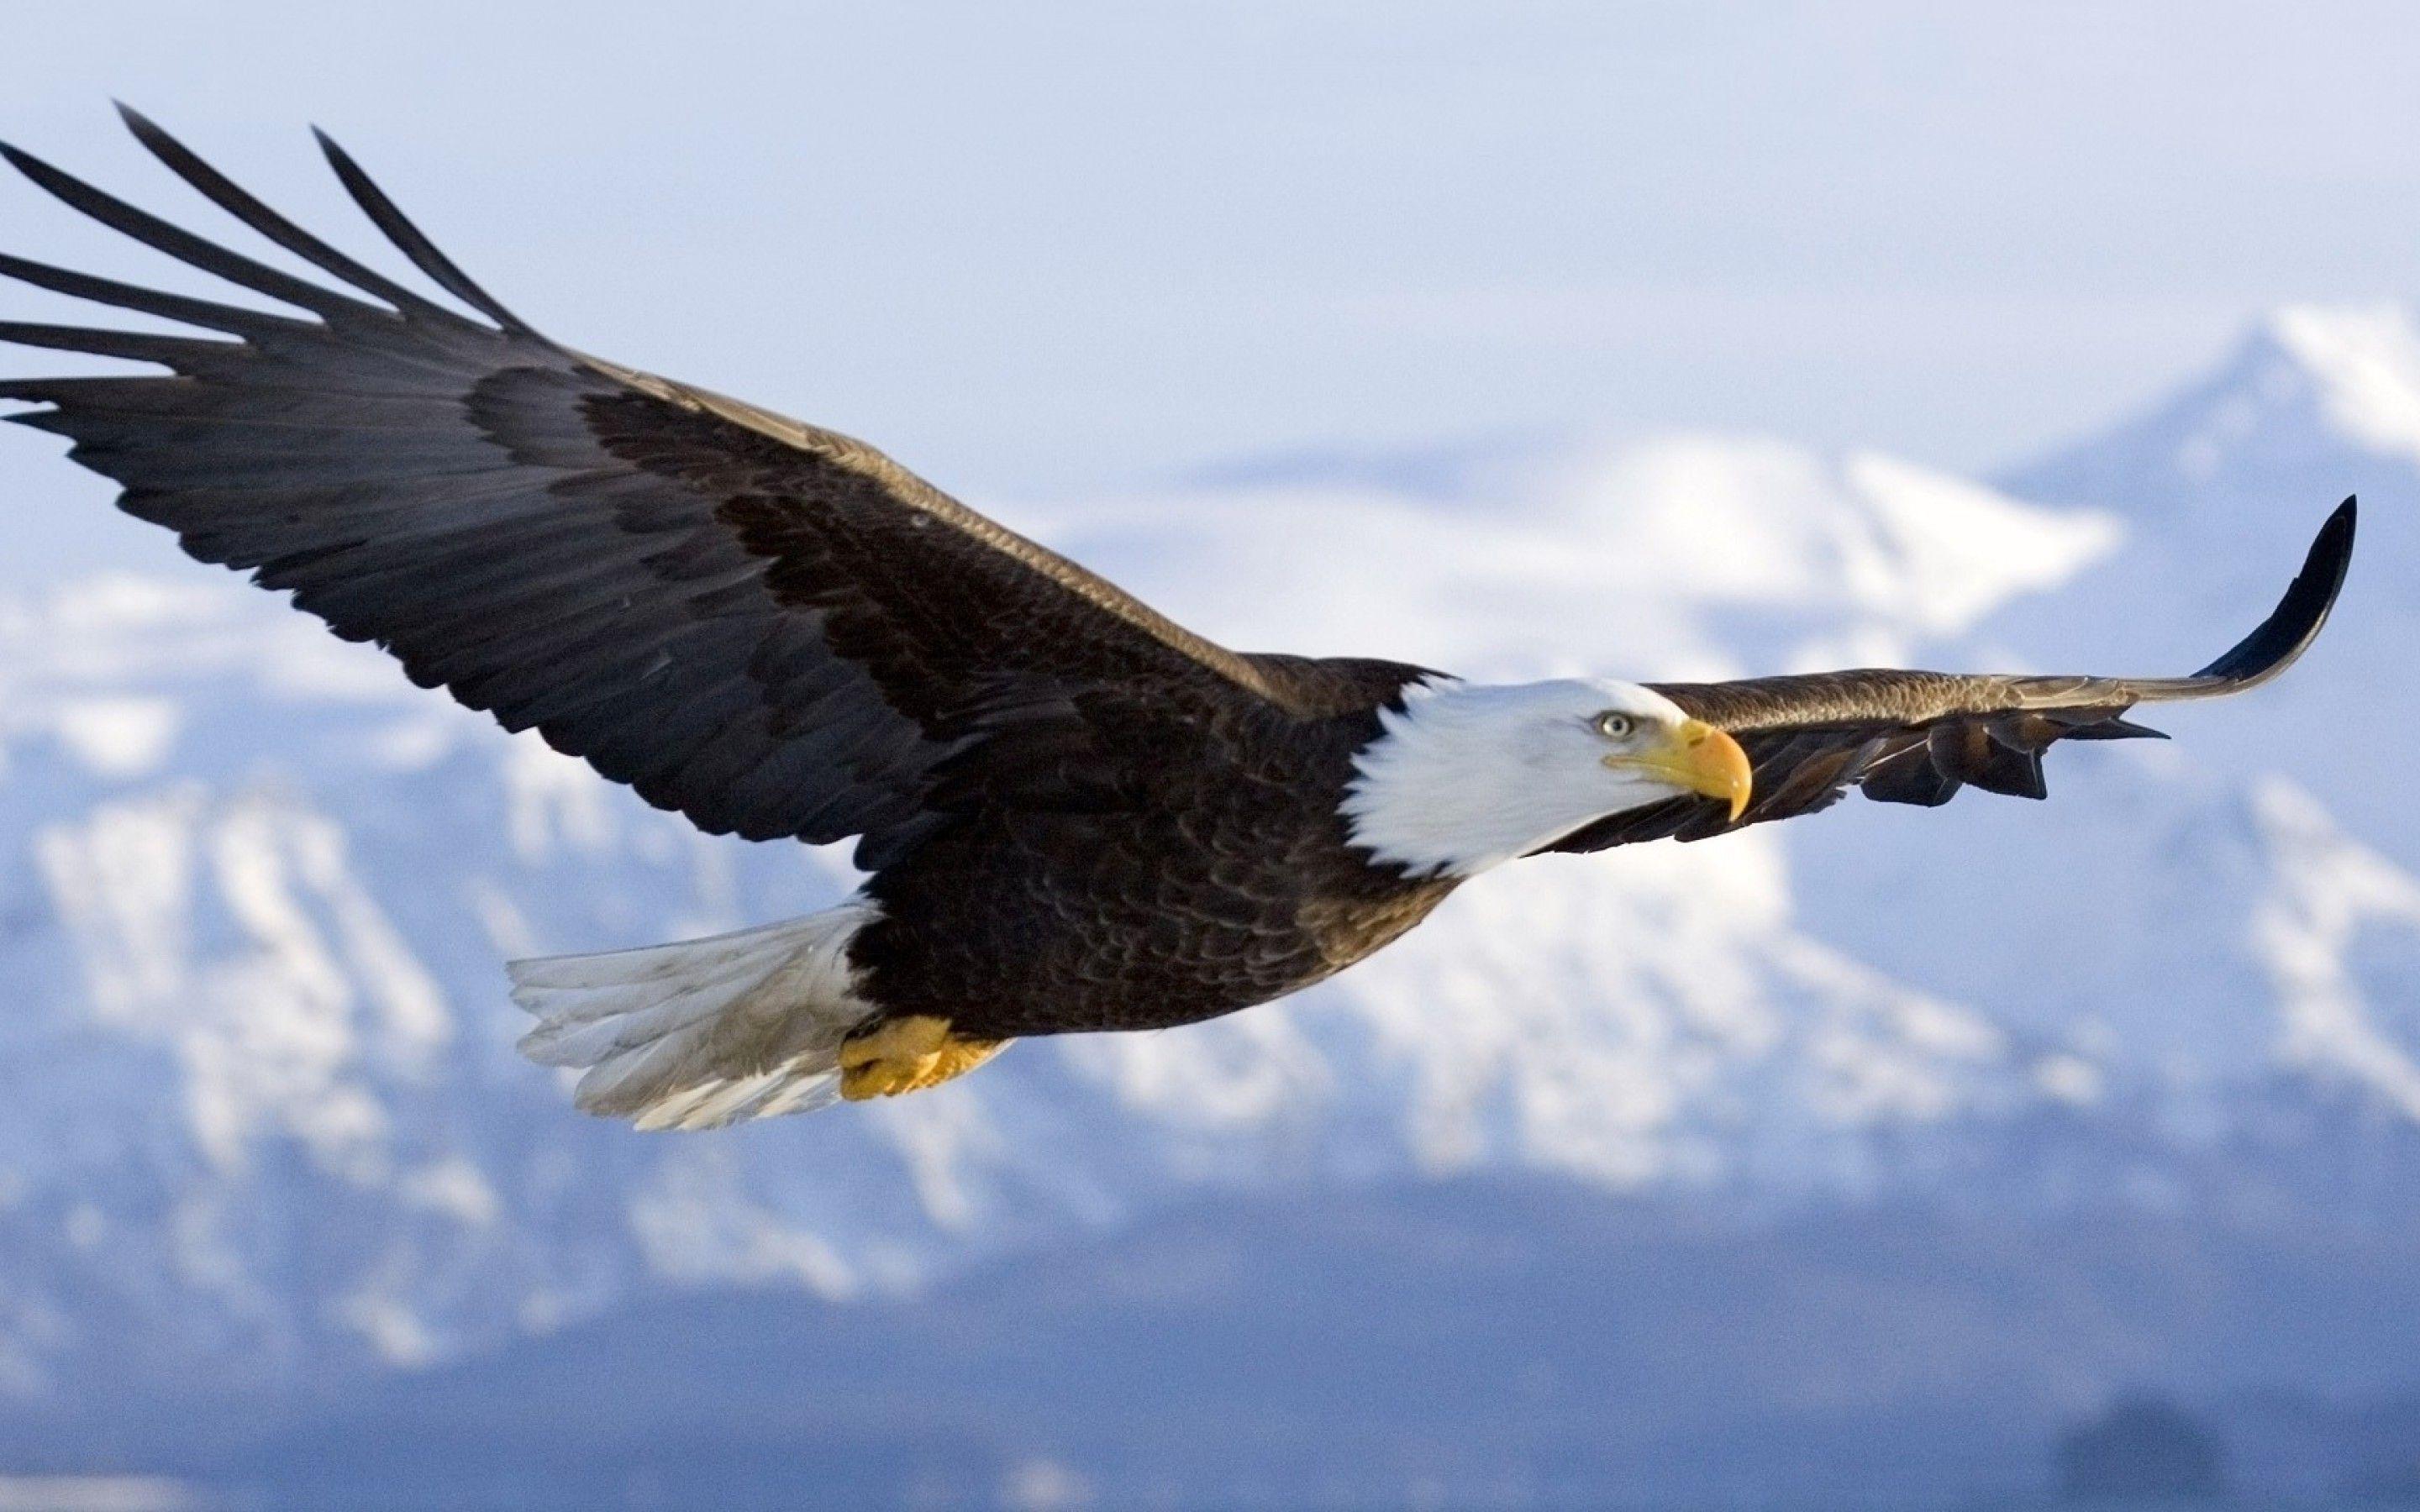 Free Bald Eagle Wallpapers Wallpaper Cave